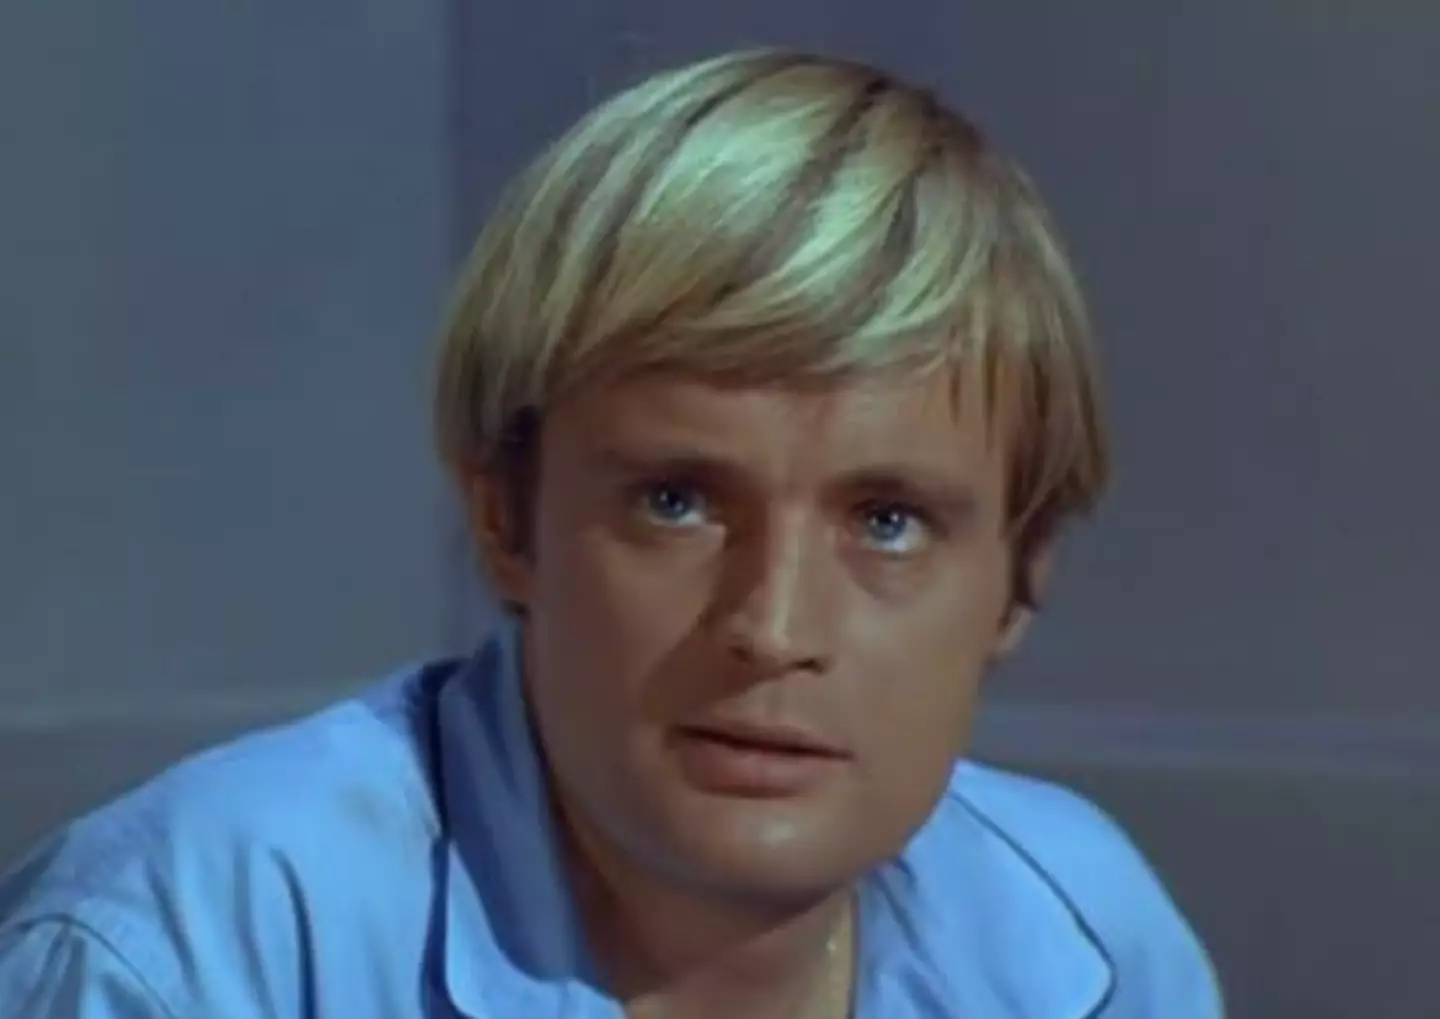 David McCallum is best known for his role in 'The Man from U.N.C.L.E".